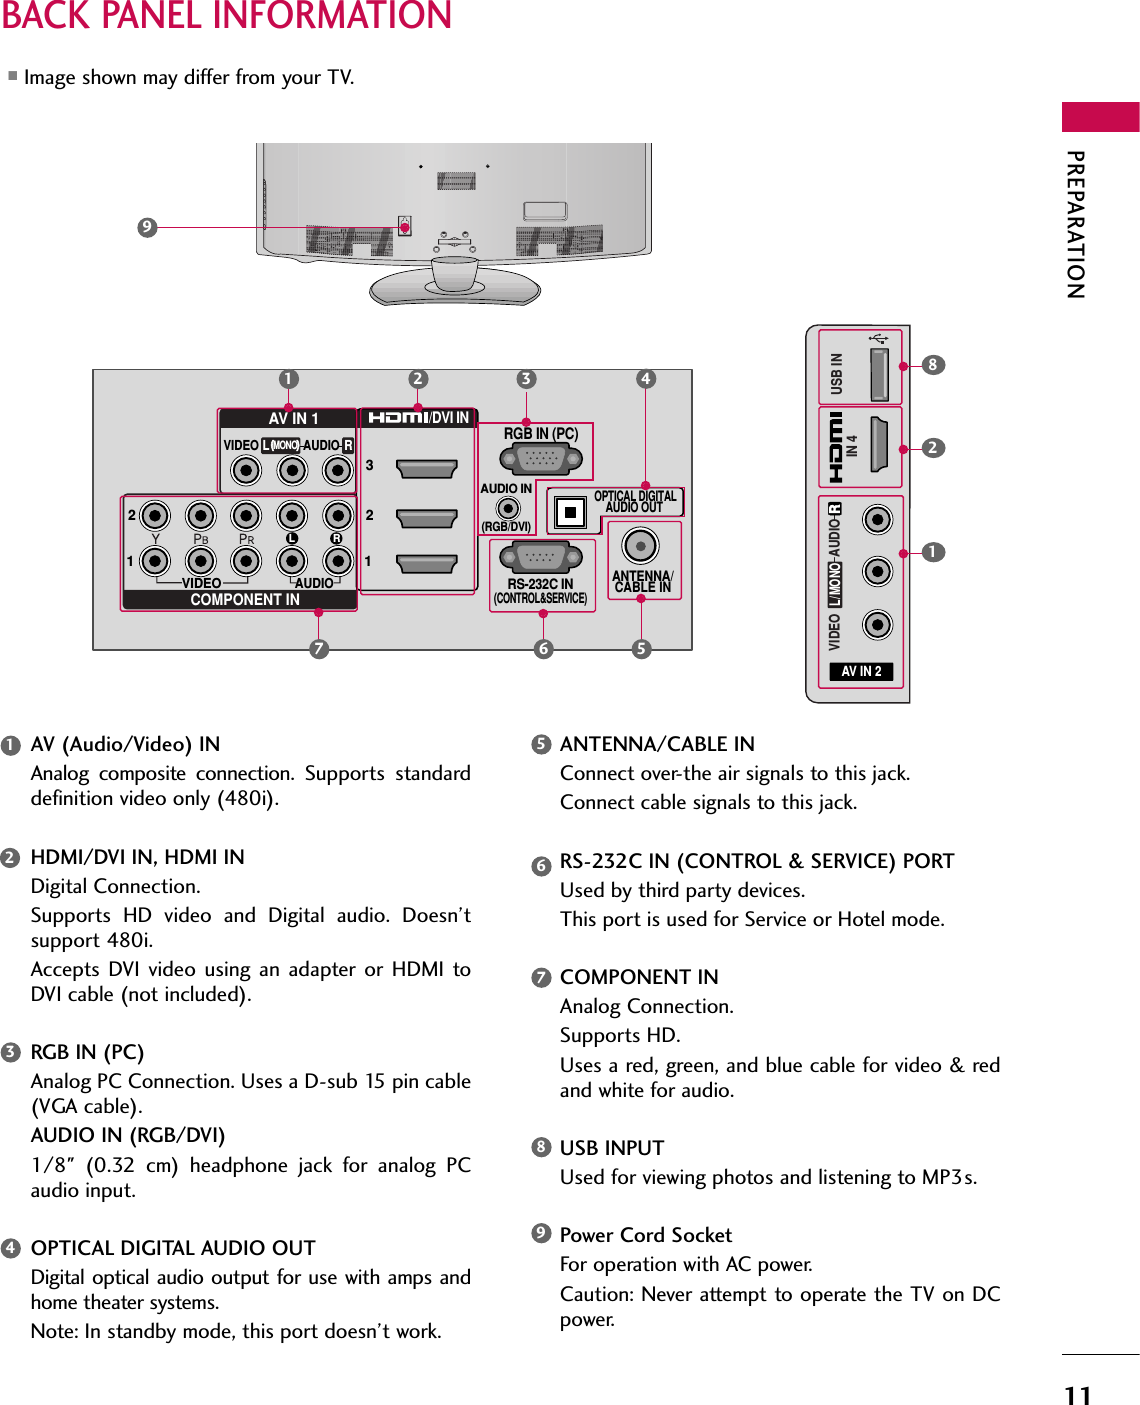 PREPARATION11BACK PANEL INFORMATION■Image shown may differ from your TV.VIDEOAUDIOL RRS-232C IN(CONTROL&amp;SERVICE)AUDIO IN(RGB/DVI)OPTICAL DIGITALAUDIO OUT ANTENNA/CABLE INRGB IN (PC)AV IN 1COMPONENT IN23121MONO(                        )AUDIOVIDEO/DVI IN(            )(            )LRR1 2 36 579(            )(            )(            )AV IN 2L/MONORAUDIOVIDEOUSB ININ 41824AV (Audio/Video) INAnalog  composite  connection. Supports  standarddefinition video only (480i).HDMI/DVI IN, HDMI INDigital Connection. Supports  HD  video  and  Digital  audio.  Doesn’tsupport 480i. Accepts  DVI  video  using  an  adapter  or  HDMI  toDVI cable (not included).RGB IN (PC)Analog PC Connection. Uses a D-sub 15 pin cable(VGA cable).AUDIO IN (RGB/DVI)1/8&quot;  (0.32  cm)  headphone  jack  for  analog  PCaudio input.OPTICAL DIGITAL AUDIO OUTDigital optical audio  output for  use with amps andhome theater systems. Note: In standby mode, this port doesn’t work.ANTENNA/CABLE INConnect over-the air signals to this jack.Connect cable signals to this jack.RS-232C IN (CONTROL &amp; SERVICE) PORTUsed by third party devices.This port is used for Service or Hotel mode.COMPONENT INAnalog Connection. Supports HD. Uses a red, green, and blue cable for video &amp; redand white for audio.USB INPUTUsed for viewing photos and listening to MP3s.Power Cord SocketFor operation with AC power. Caution: Never attempt to operate the TV on DCpower.123489765